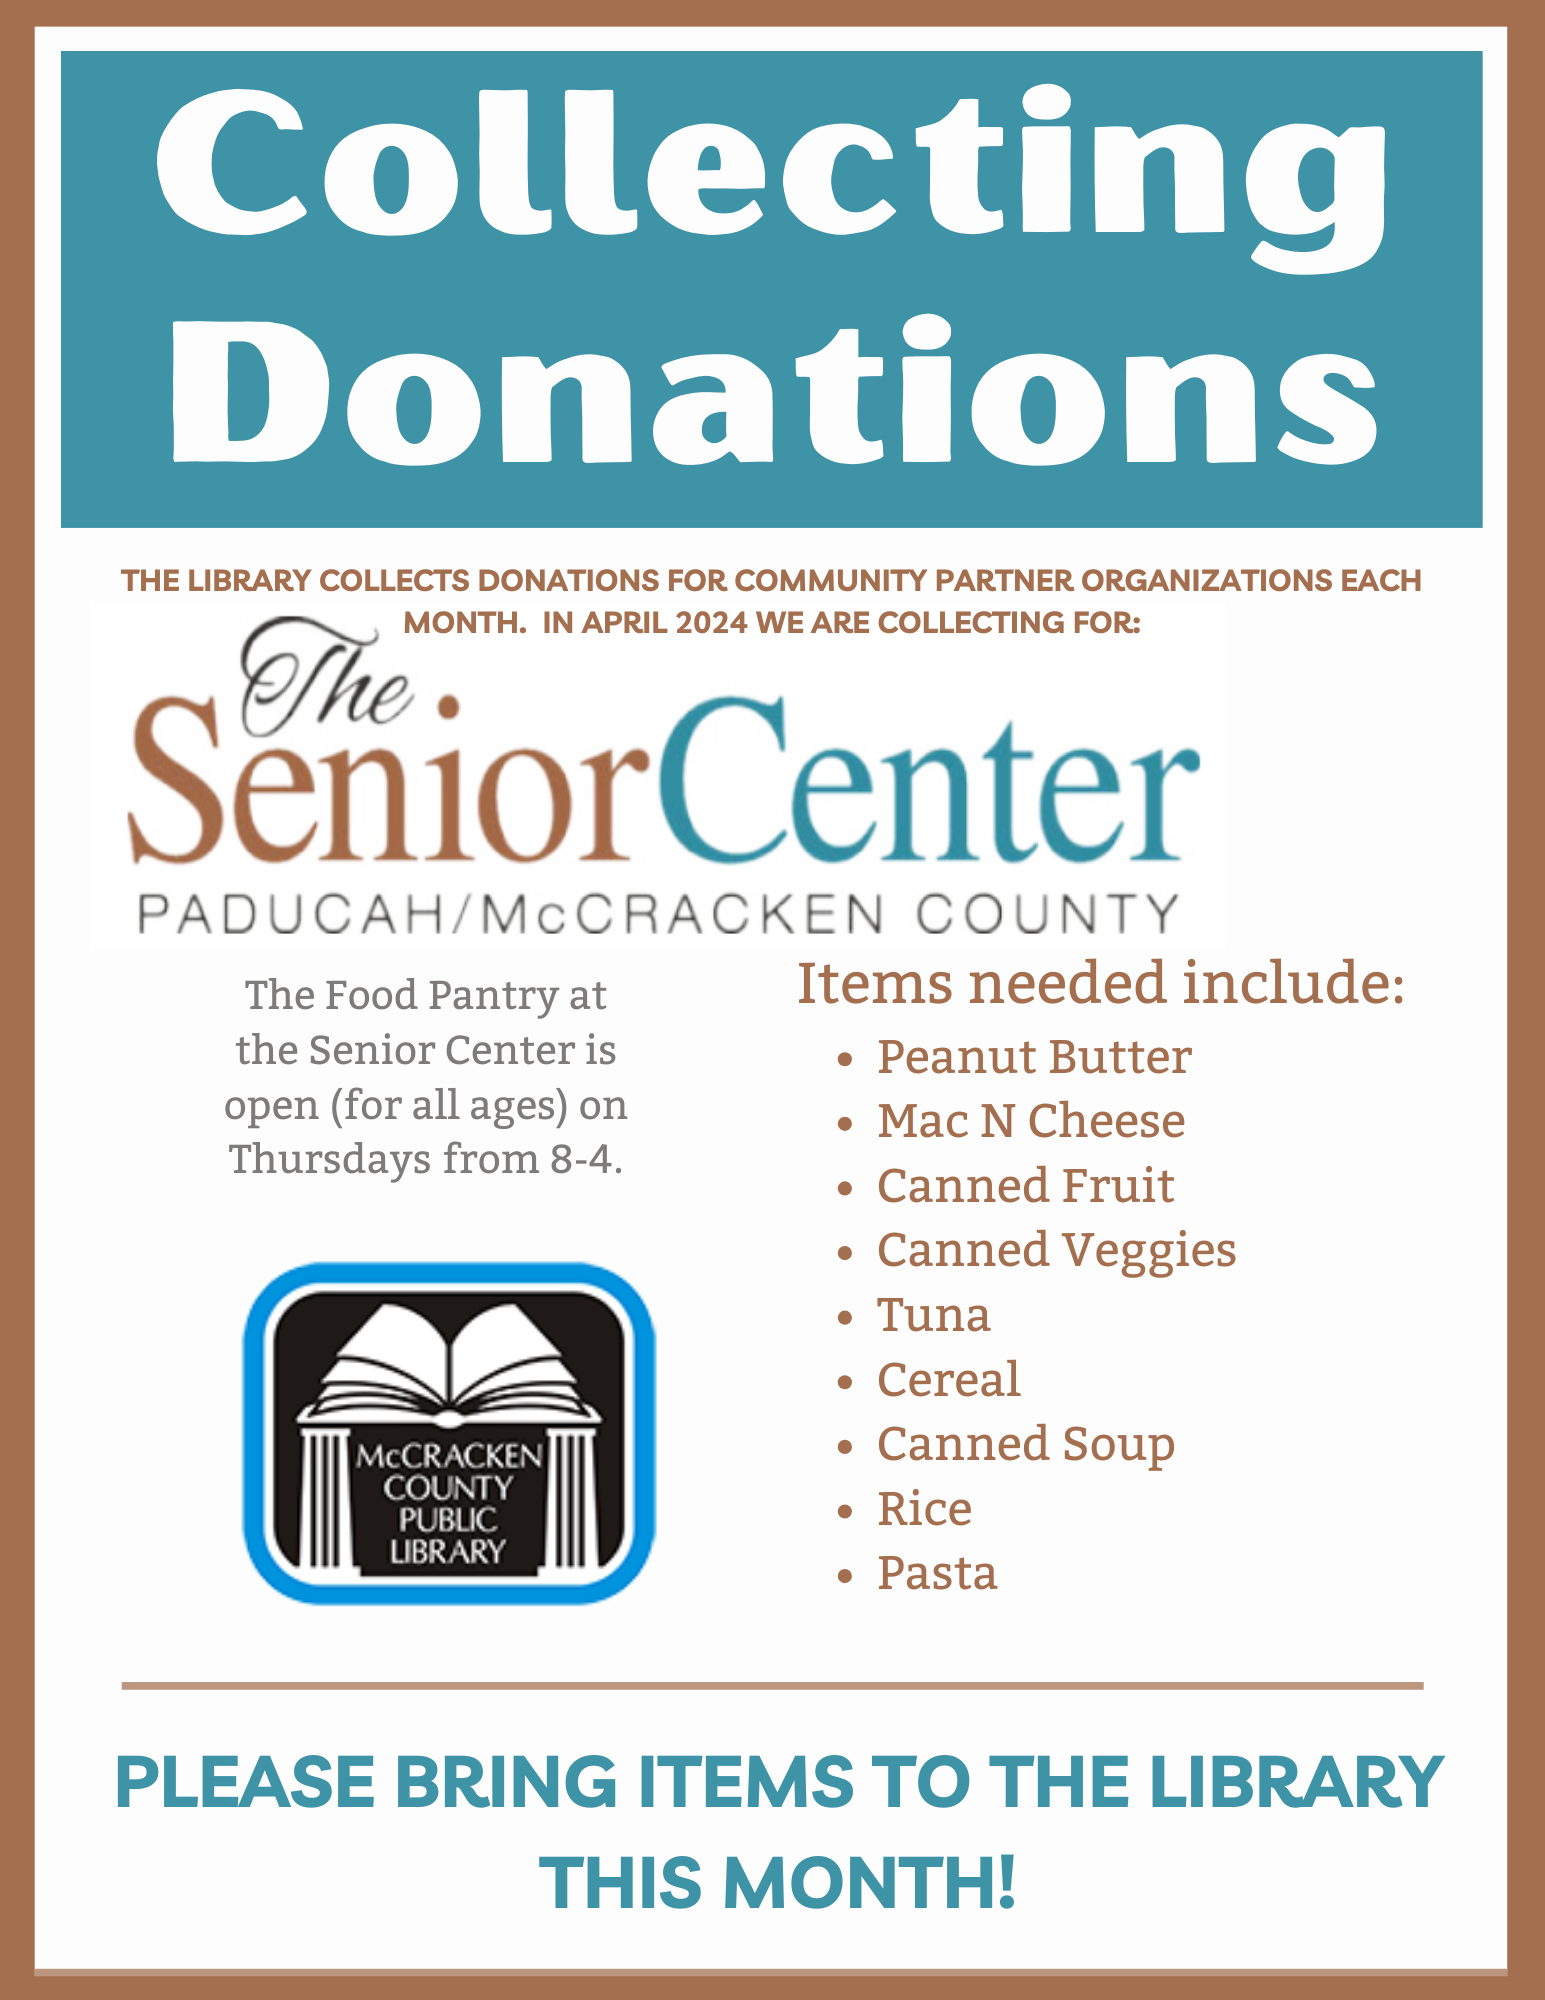 Collecting Donations for the Food Pantry at Paducah McCracken County Senior Center